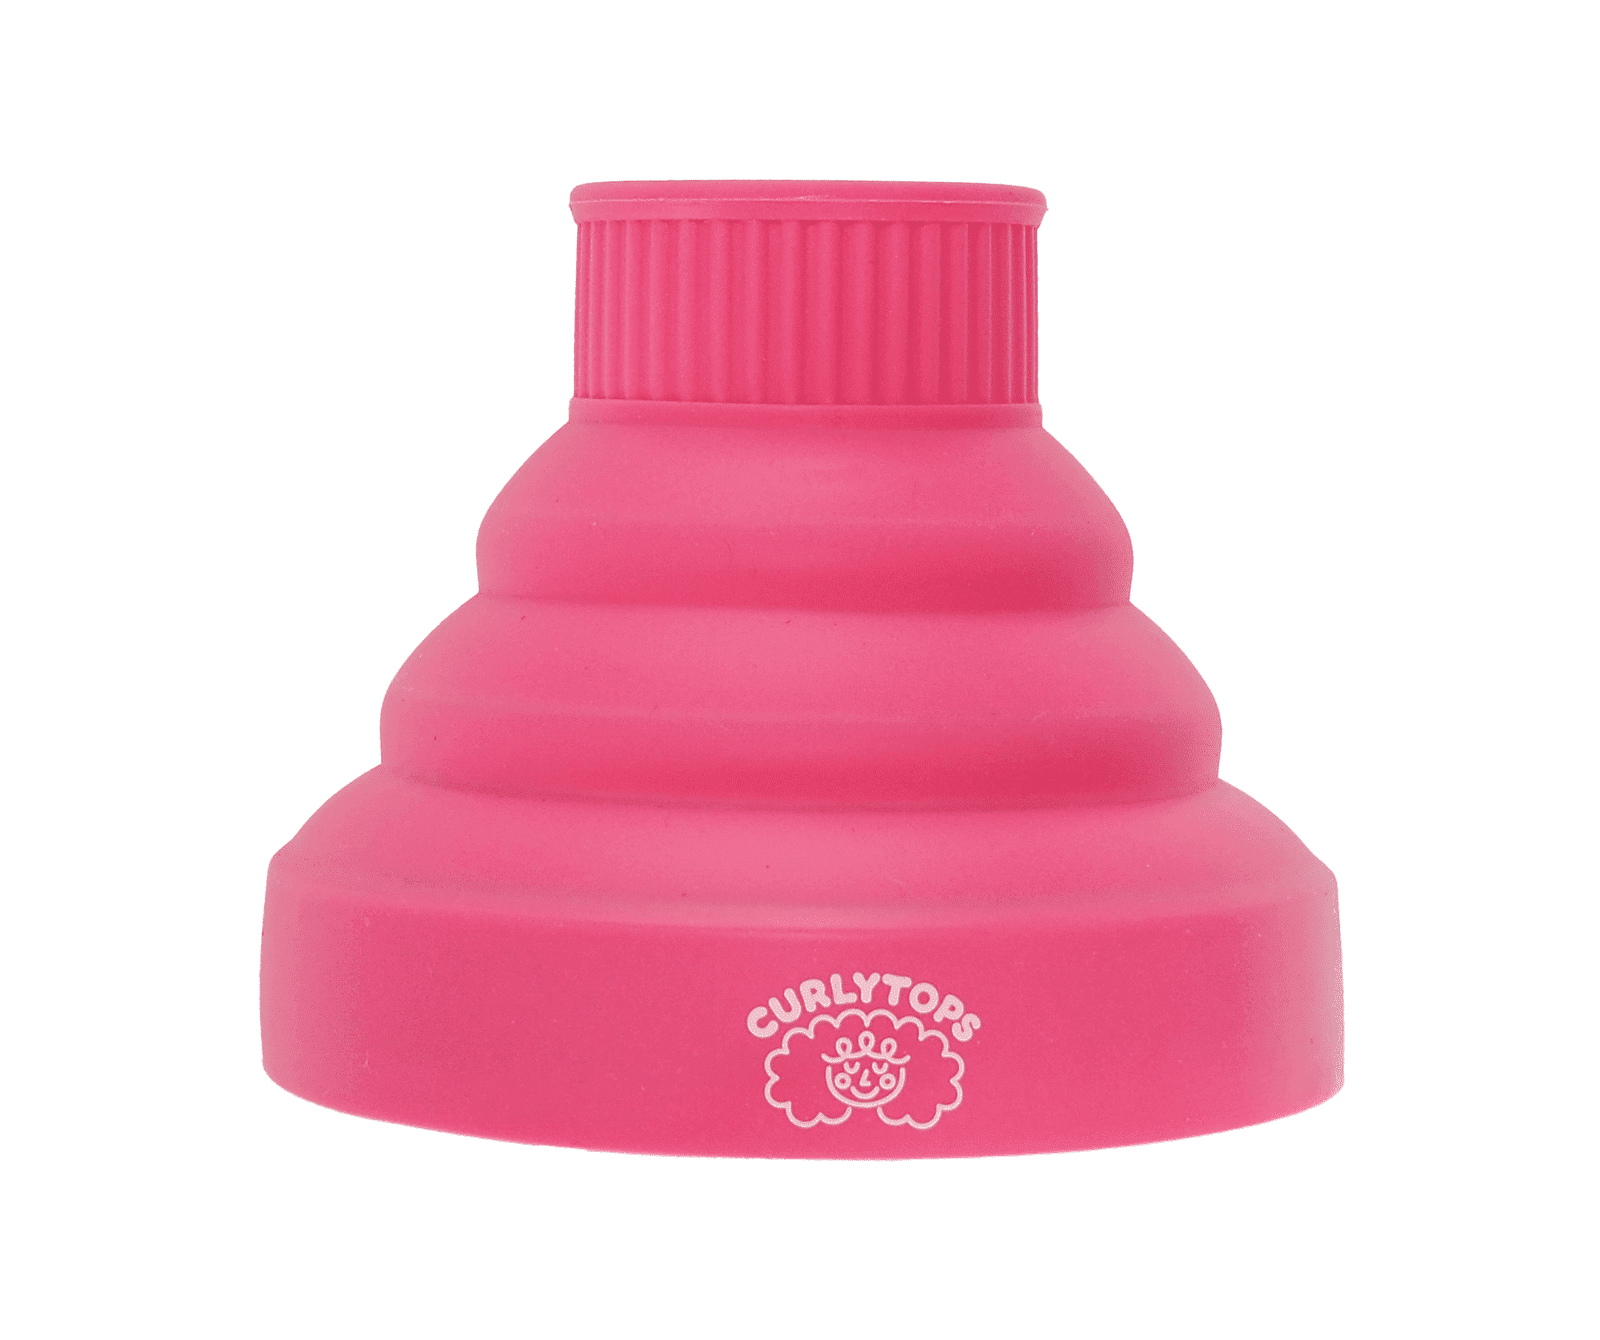 Curlytops Silicone Hair Diffuser - fits most hairdryers